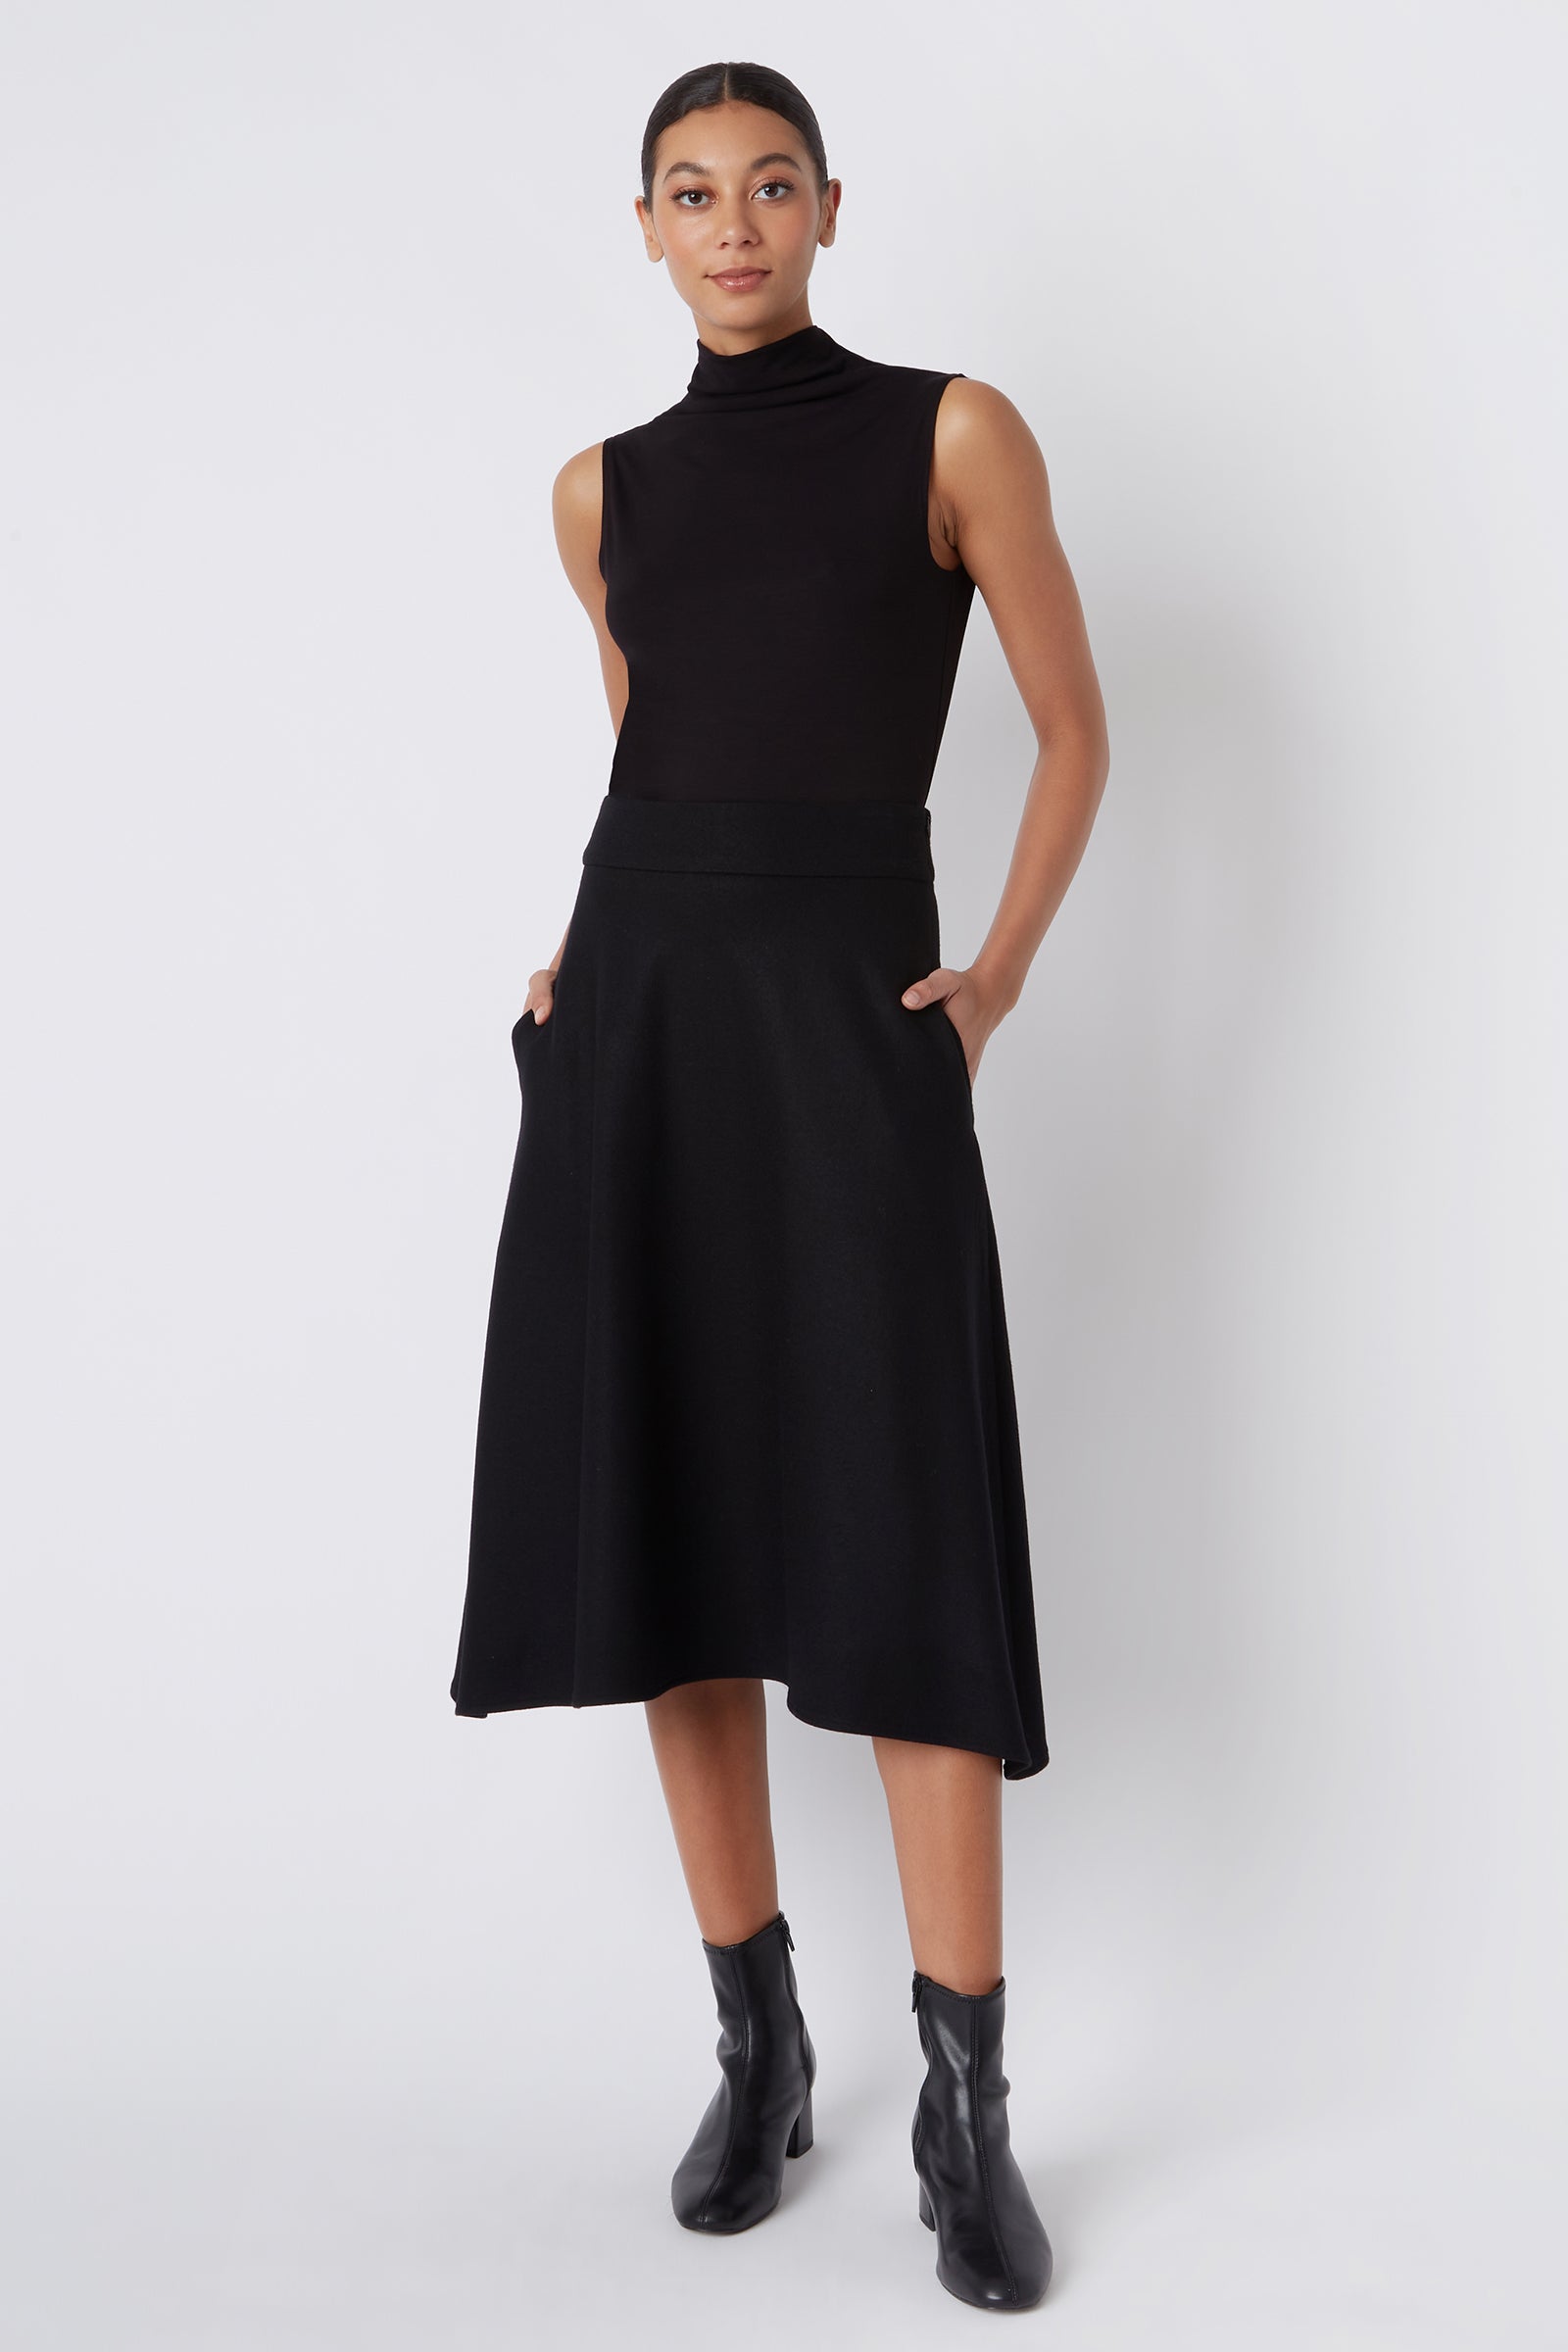 Kal Rieman Martina Kick Skirt in Black Felted Jersey on Model Main Full Front View